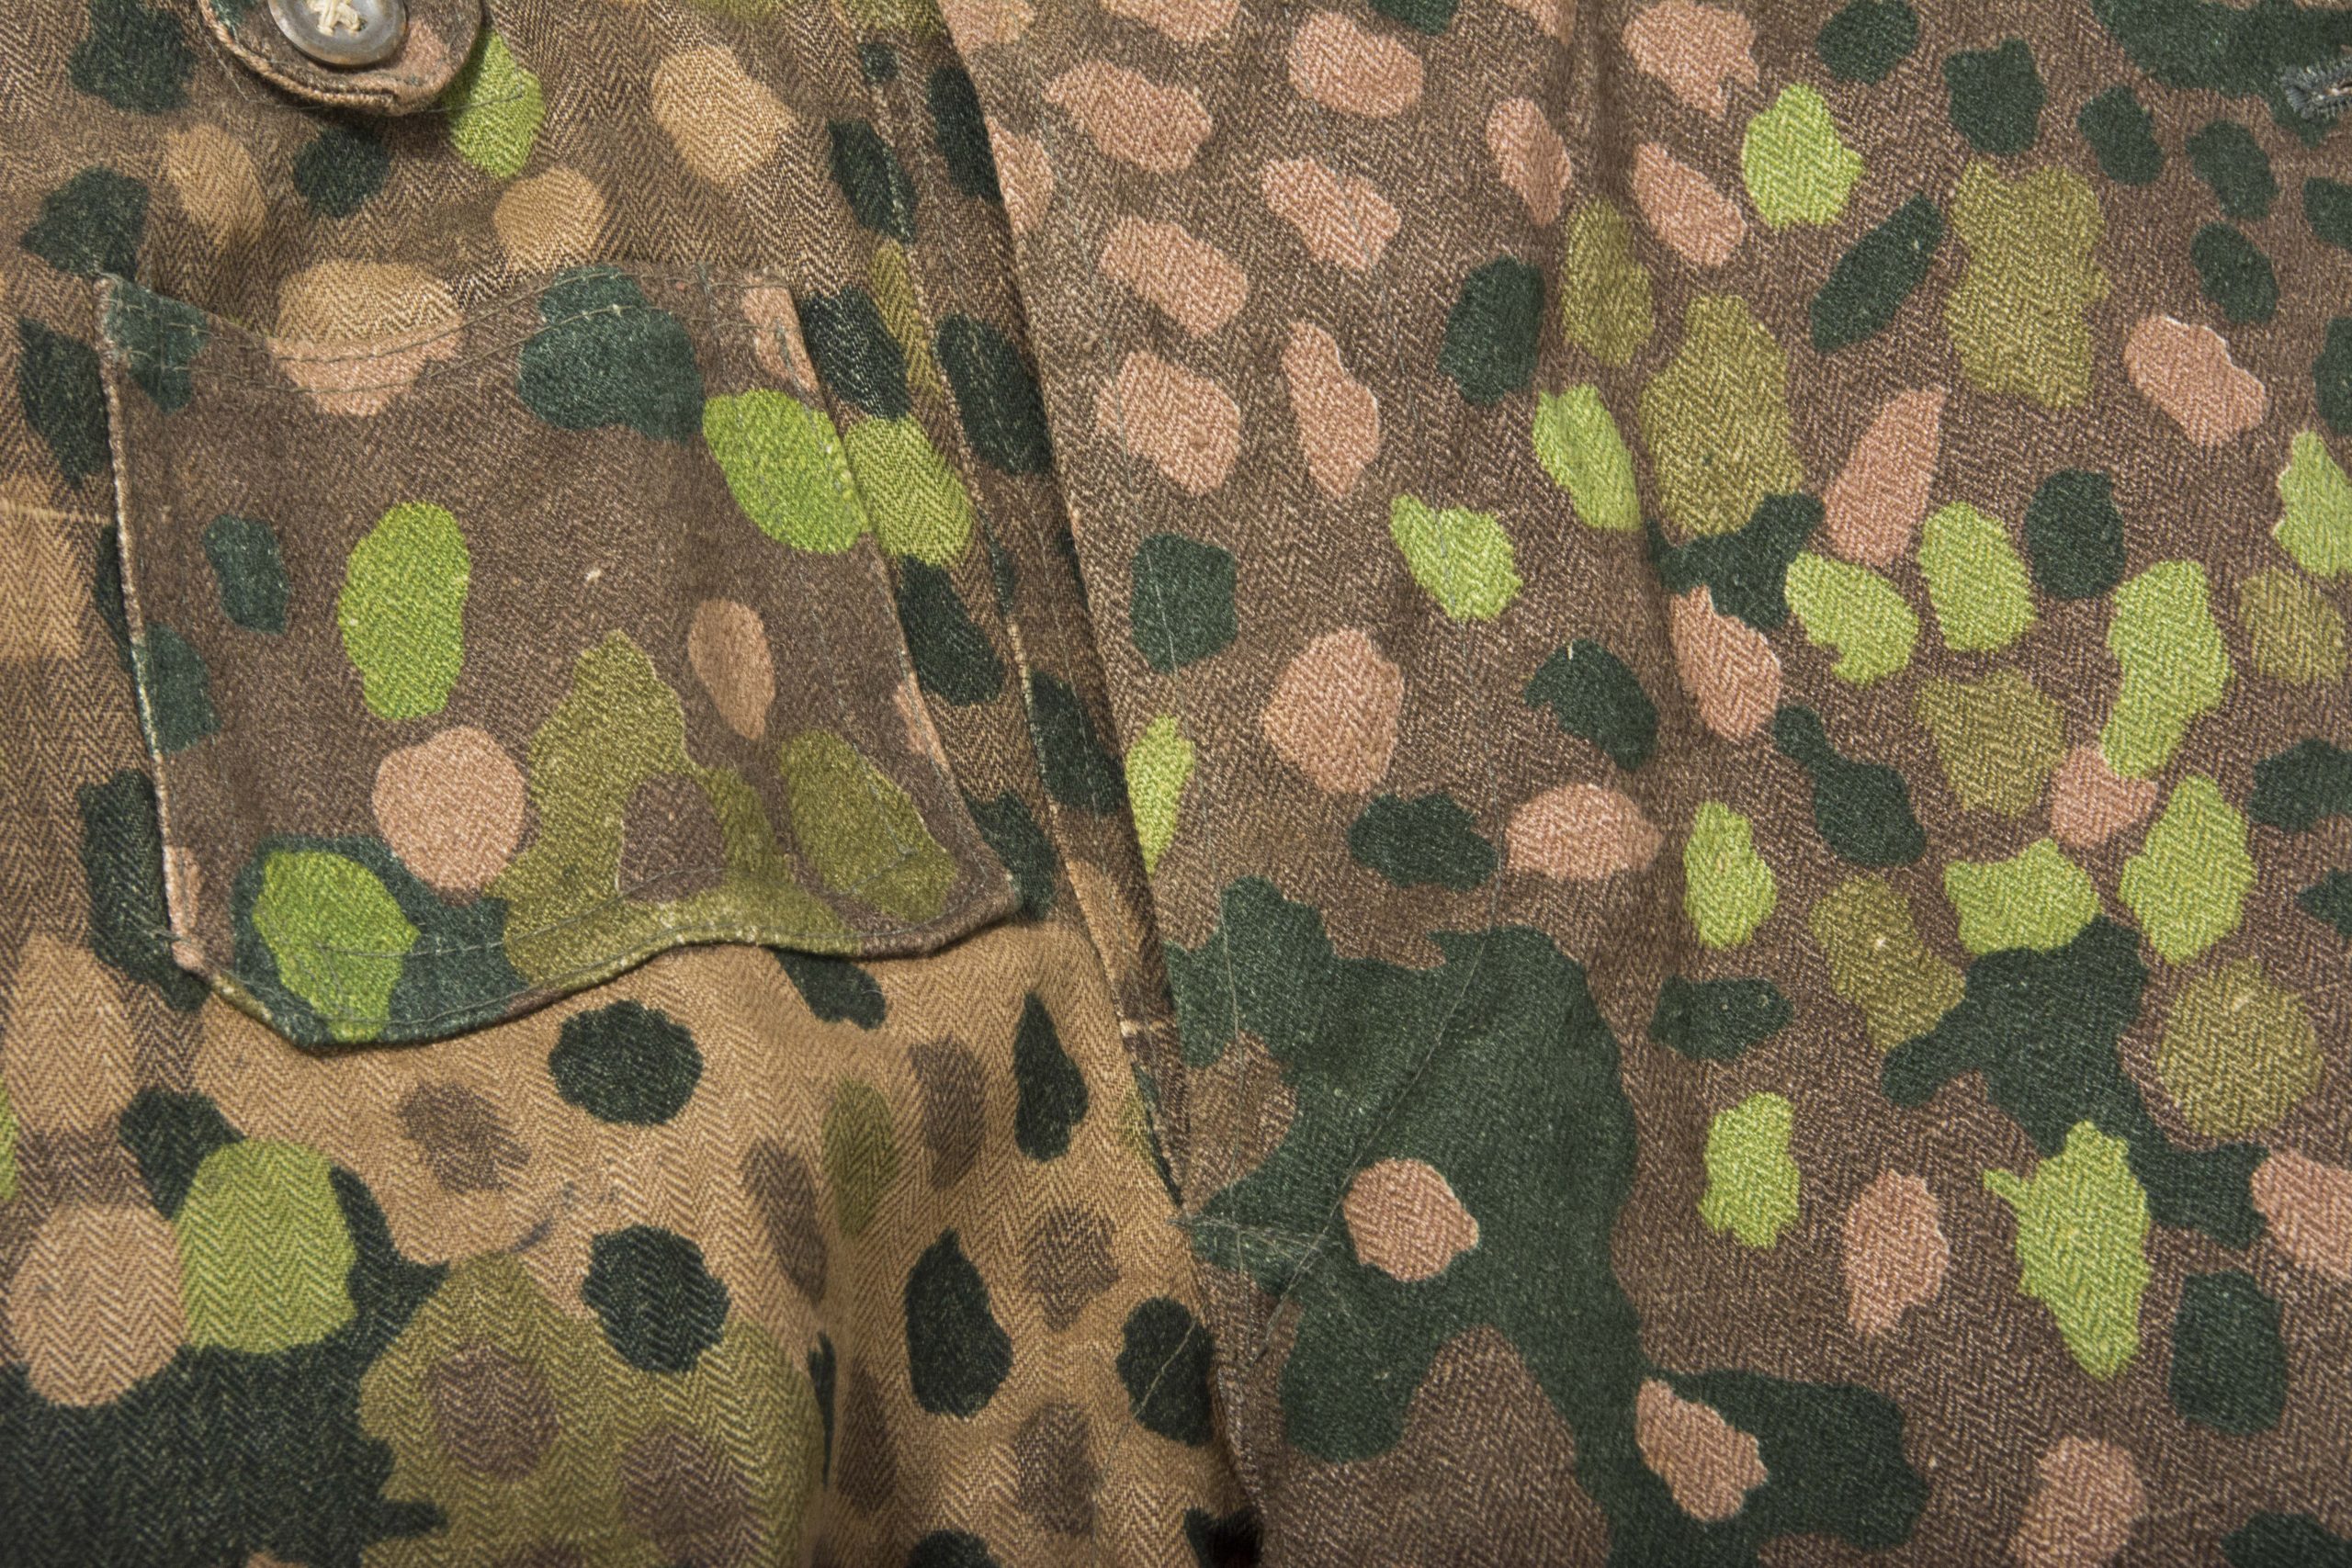 Mint Waffen-SS Erbsentarn camouflage pattern trousers marked Betr. Ra ...